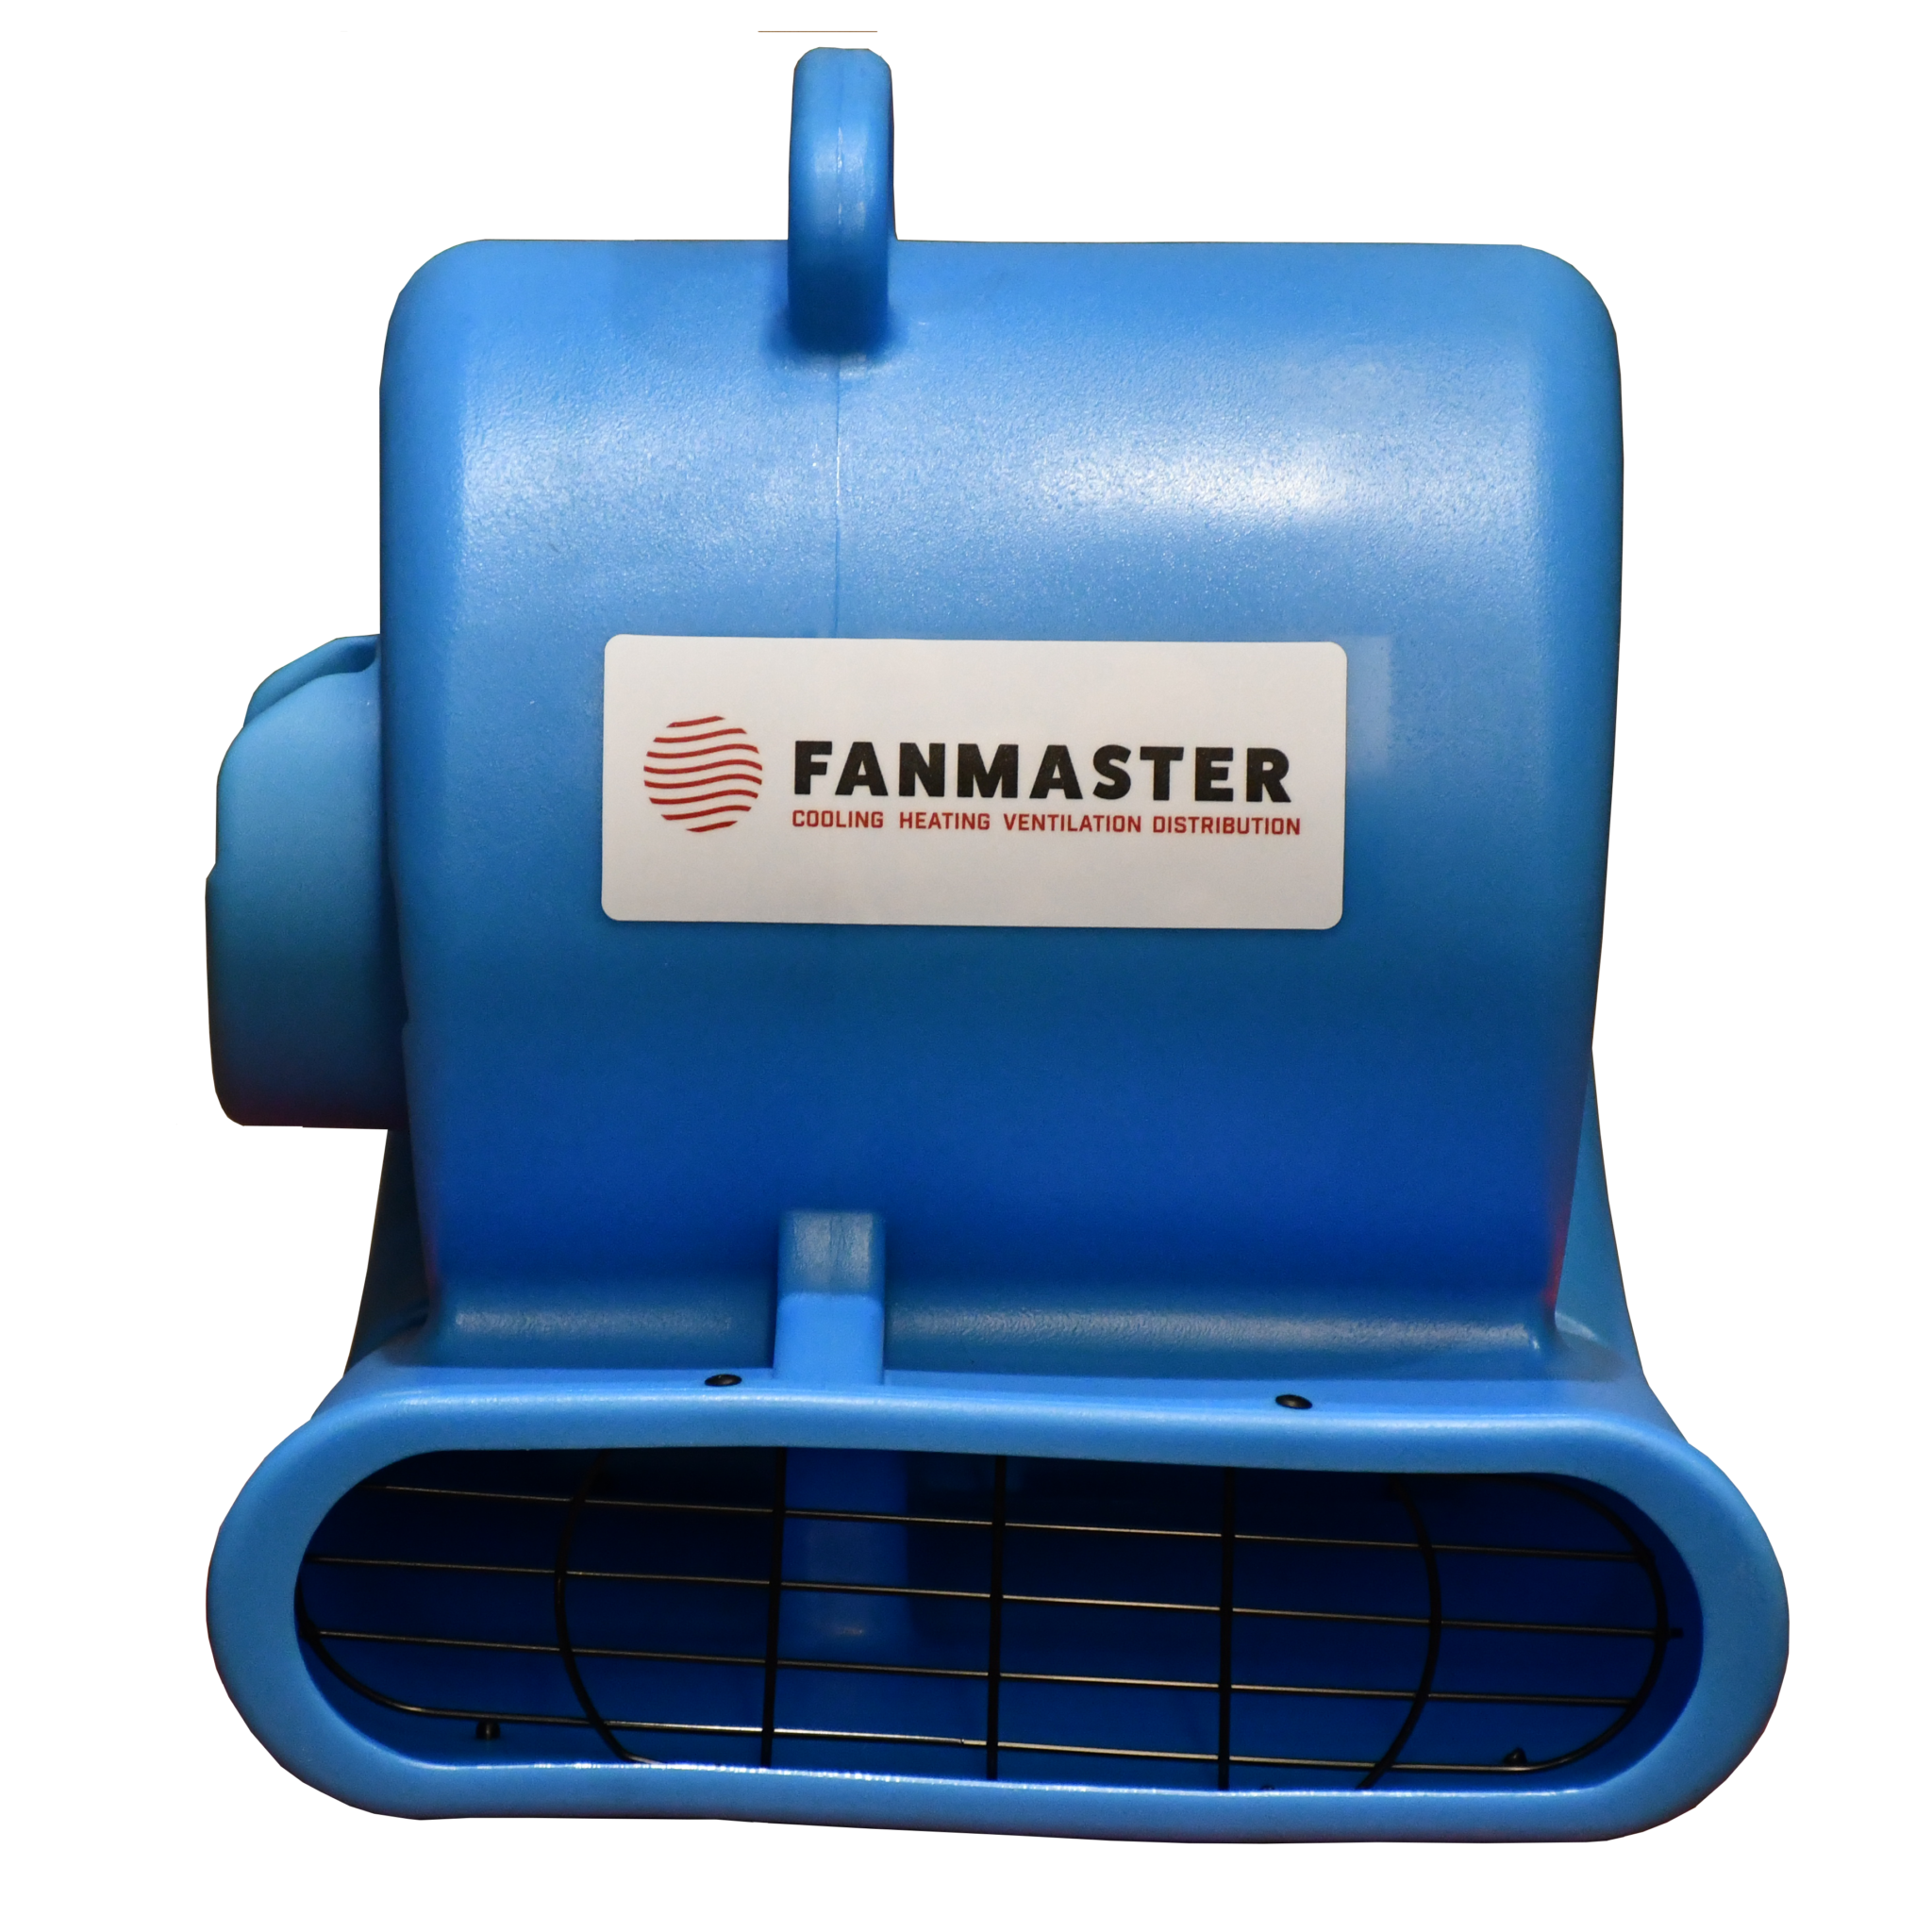 ICD-520 / Industrial Heating Cooling Ventilation Distribution Fans Warehouse Australia / Fanmaster